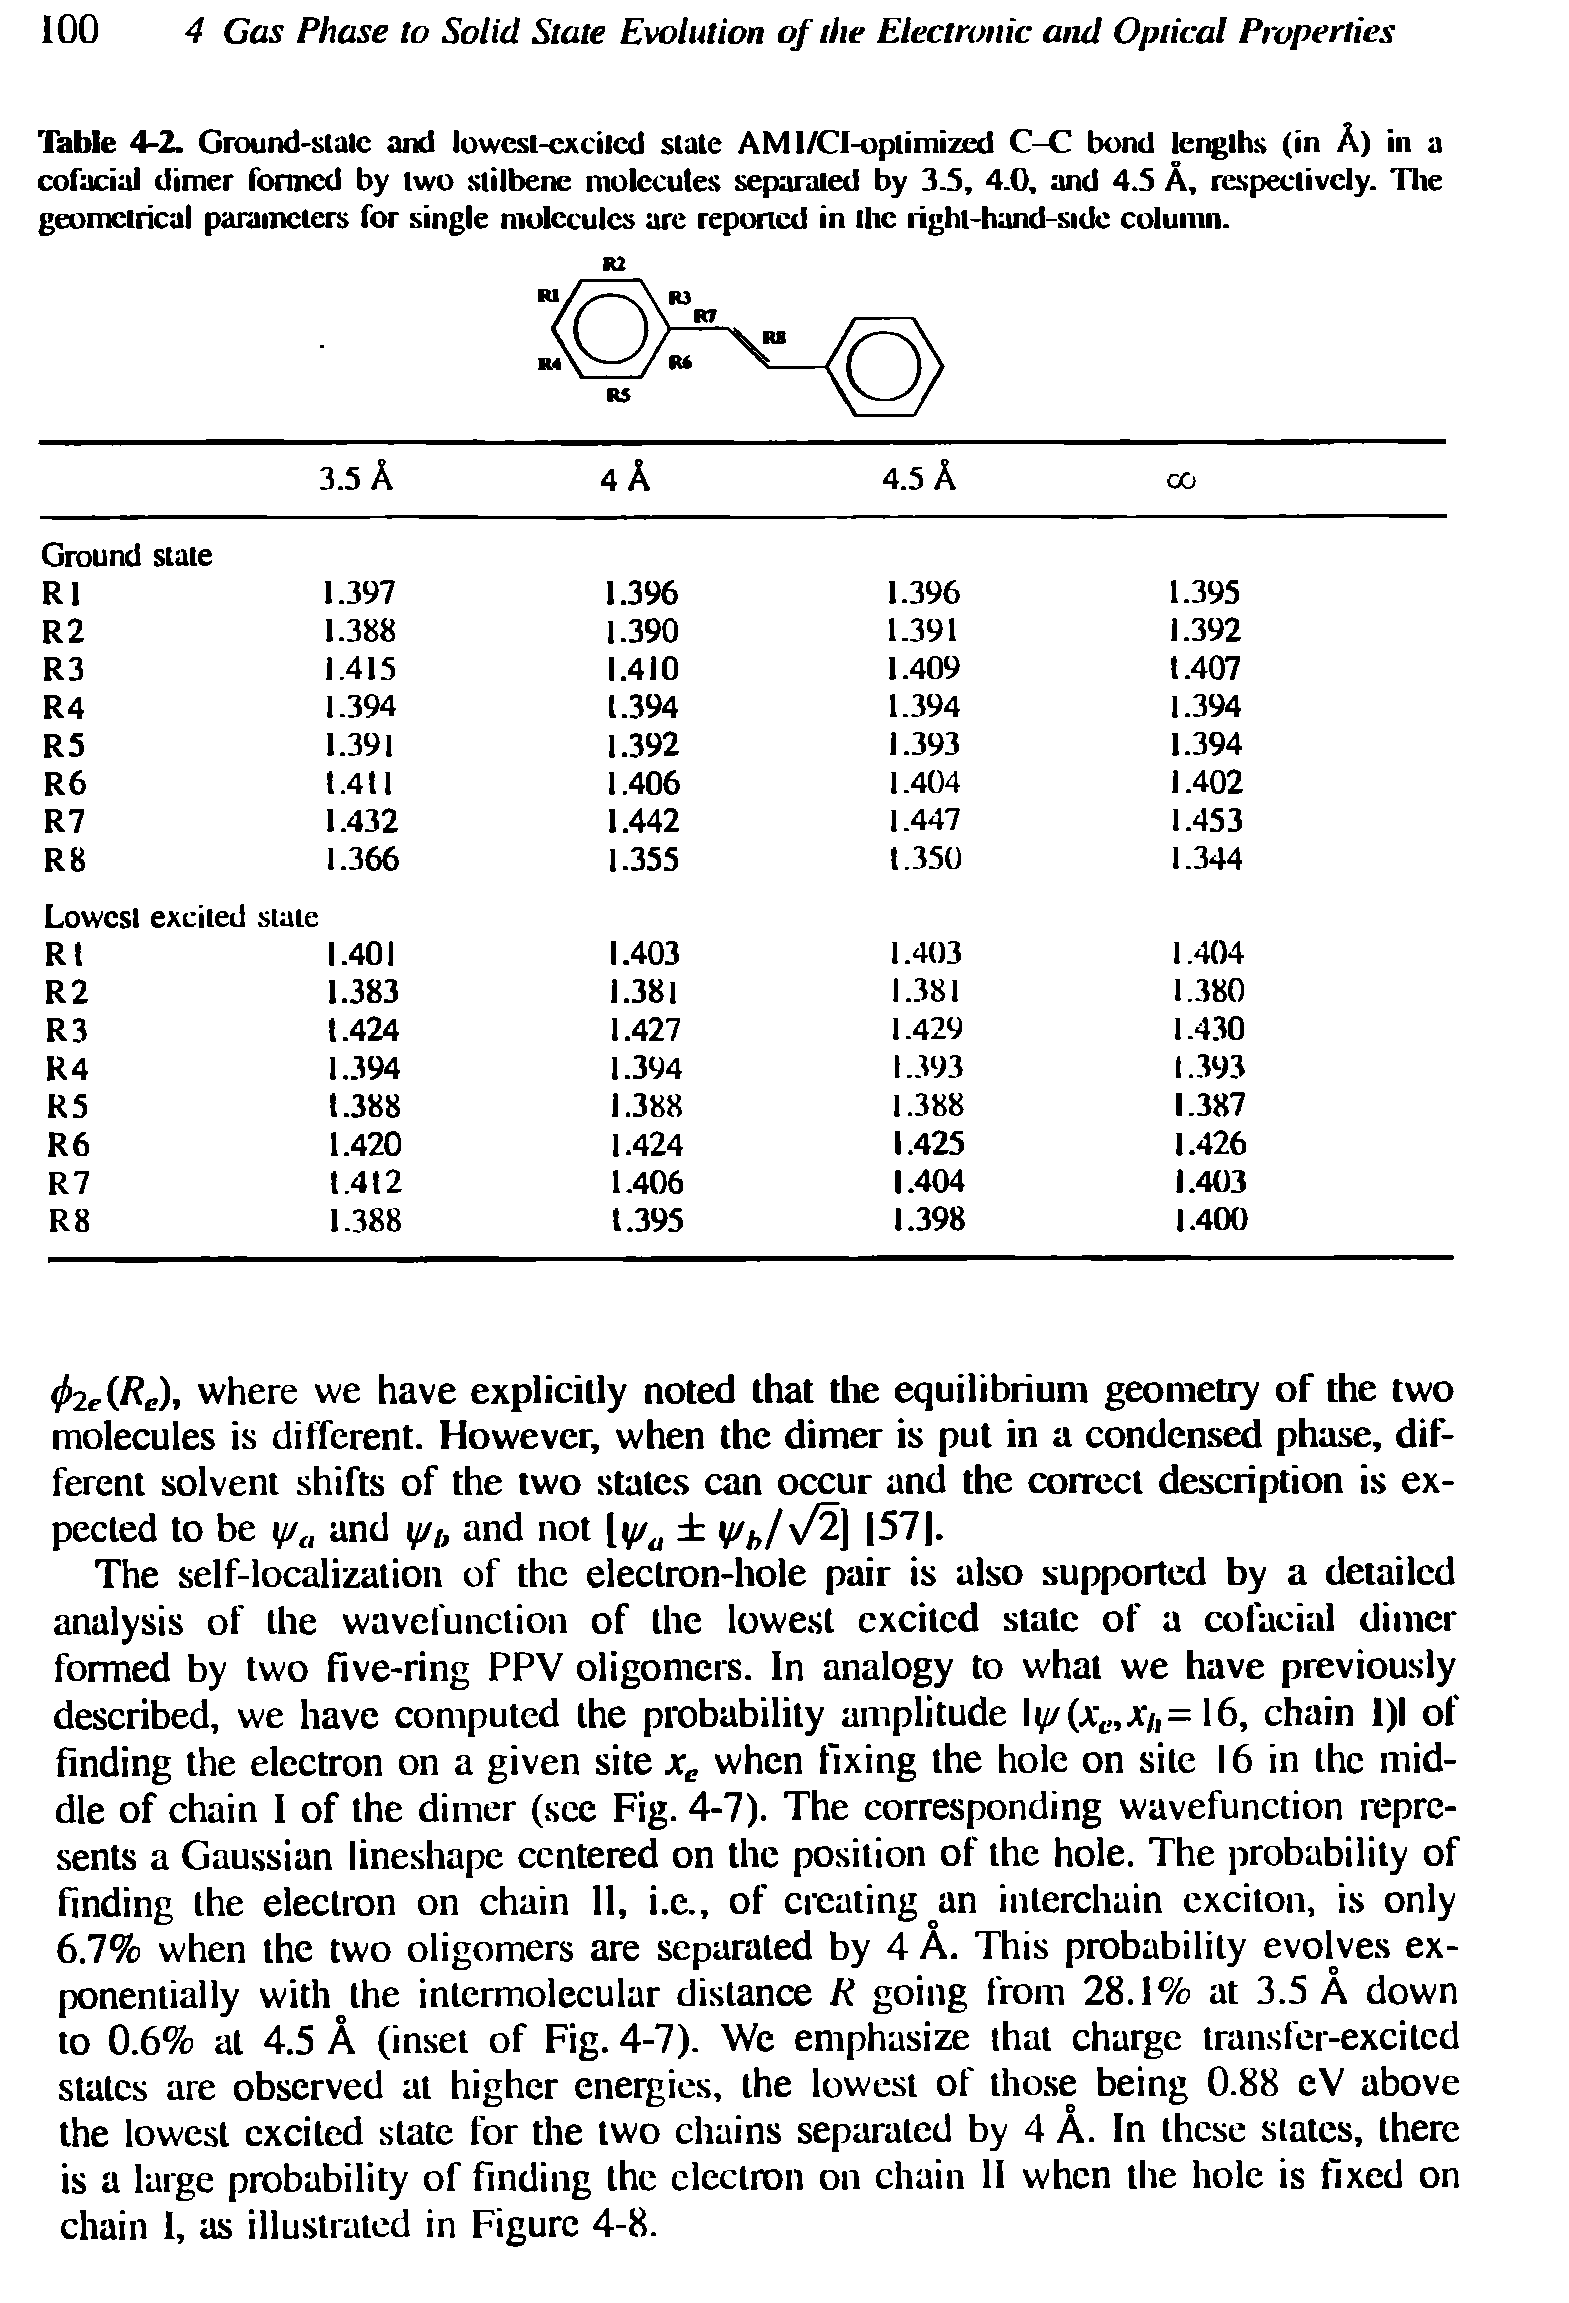 Table 4-2. Ground-slalc and lowcsl-cxcilcd slate AM l/CI-oplimized C-C bond lengths (in A) in a cofacial dimer formed by two stilbenc molecules separated by 3.5, 4.0, and 4.5 A, respectively. The geometrical parameters for single molecules arc reported in the right-hand-side column.